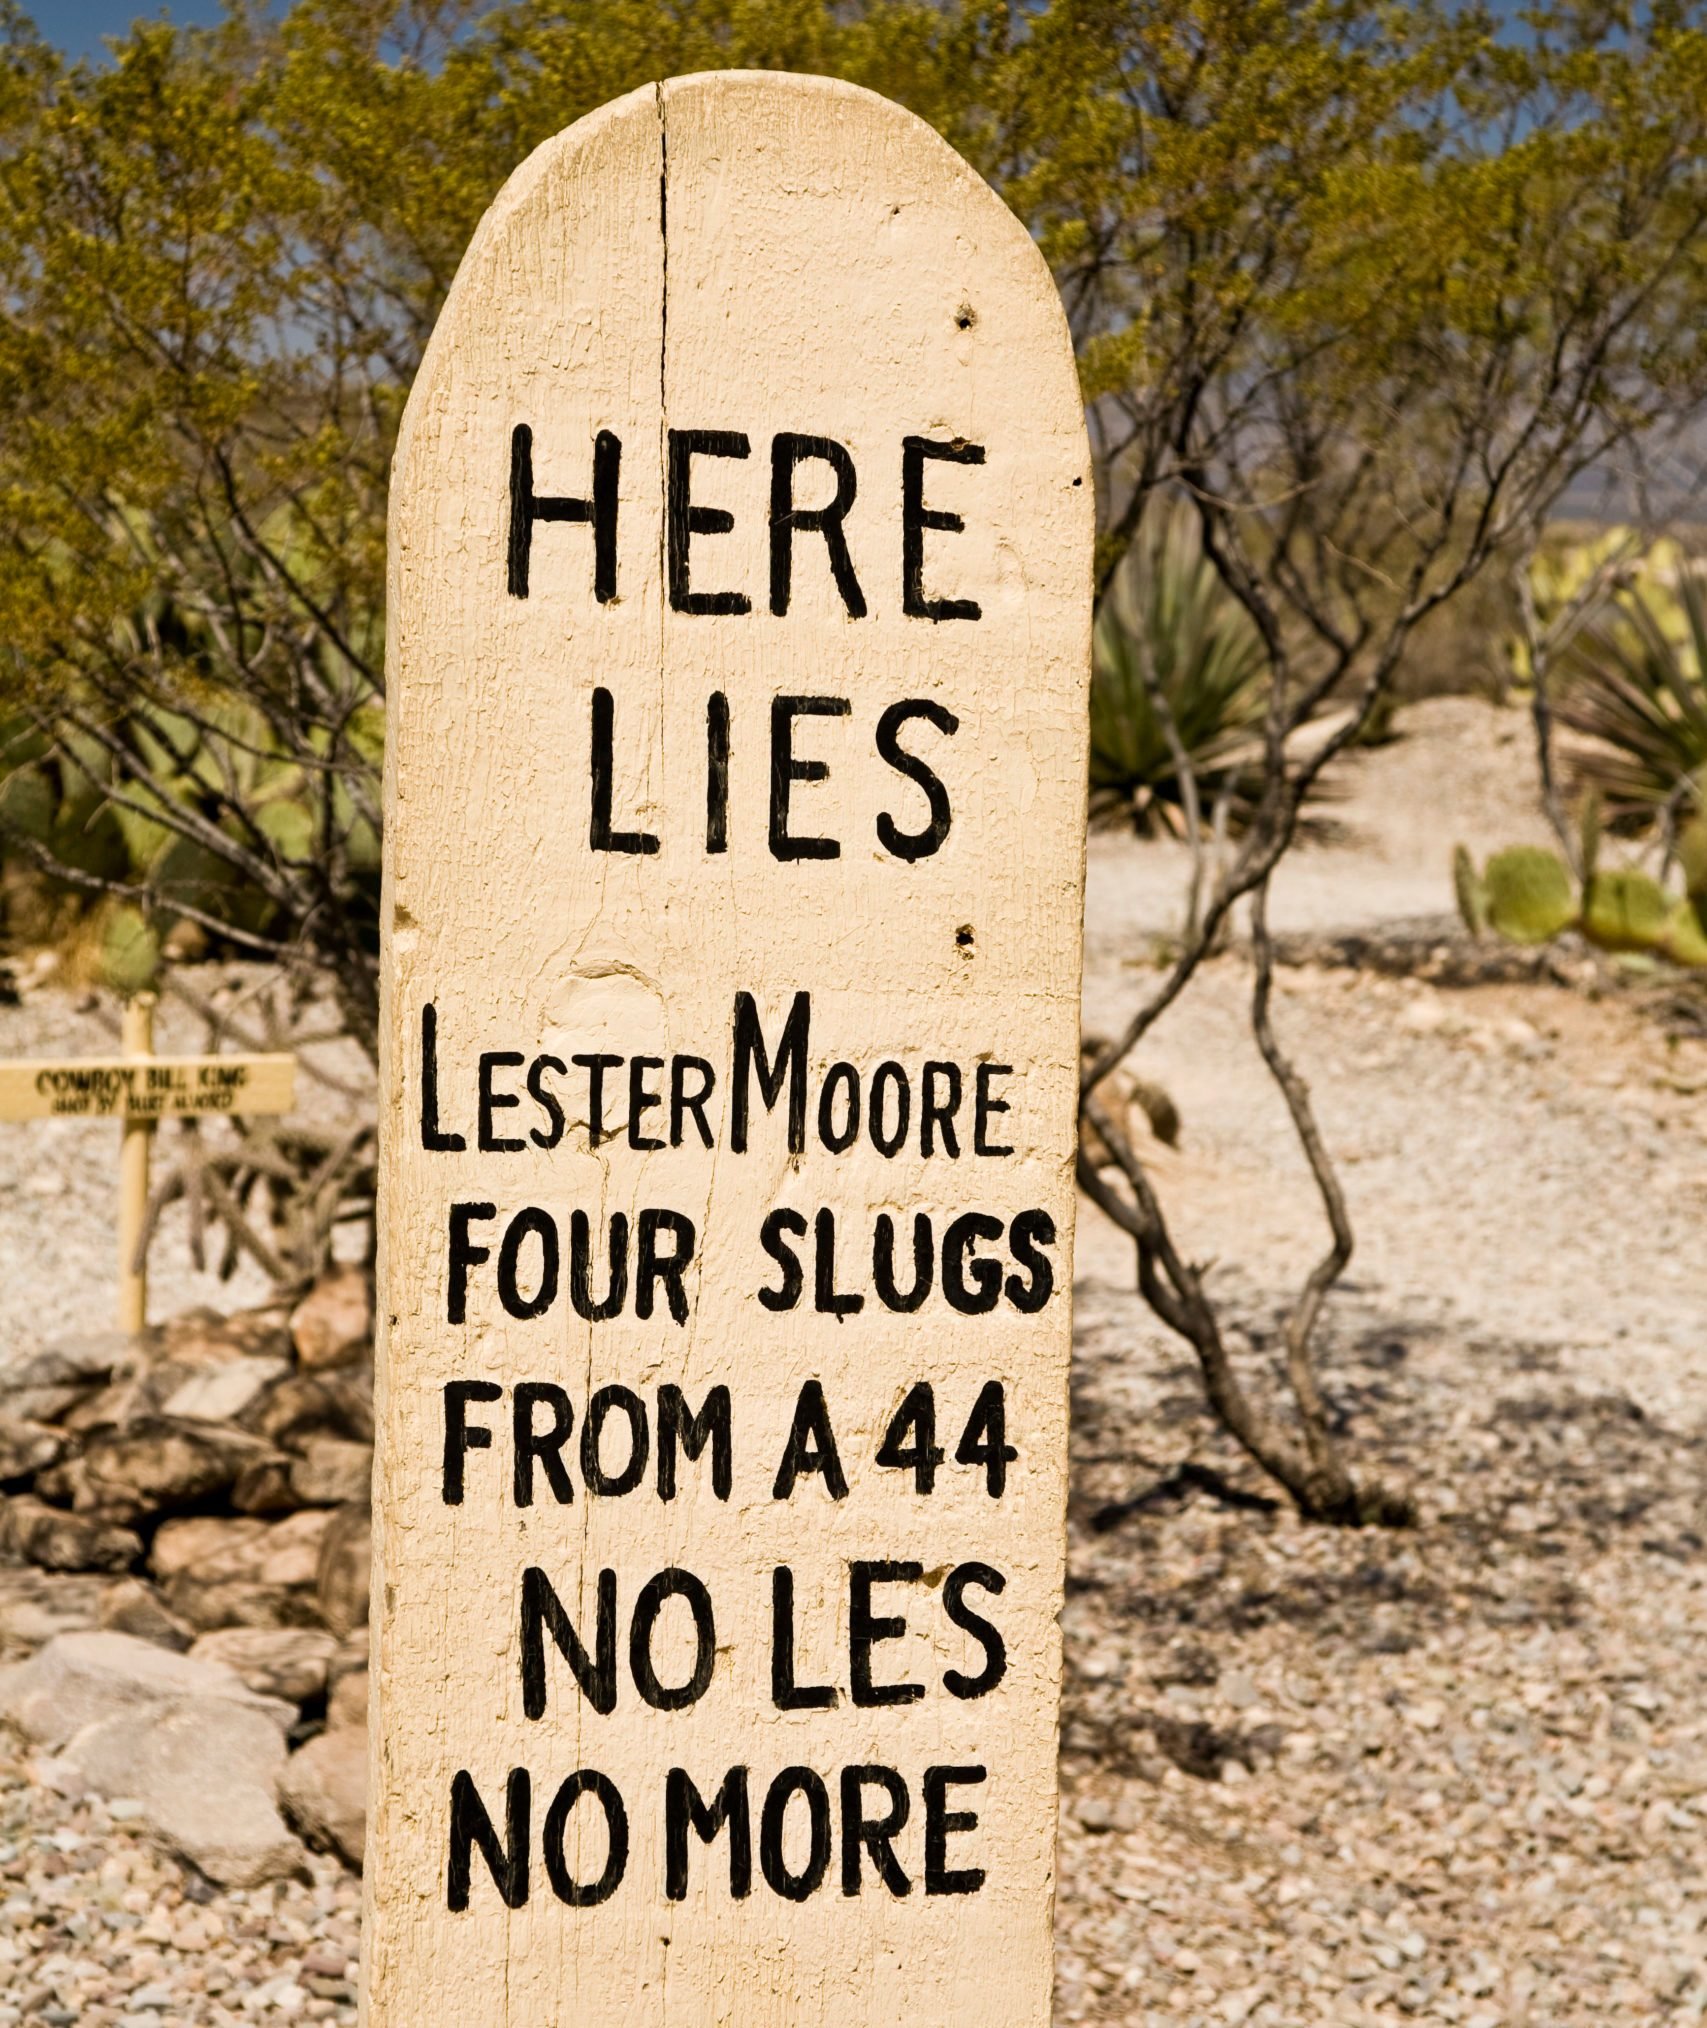 Epitaph on Grave Marker at Boot Hill Cemetery in Tombstone